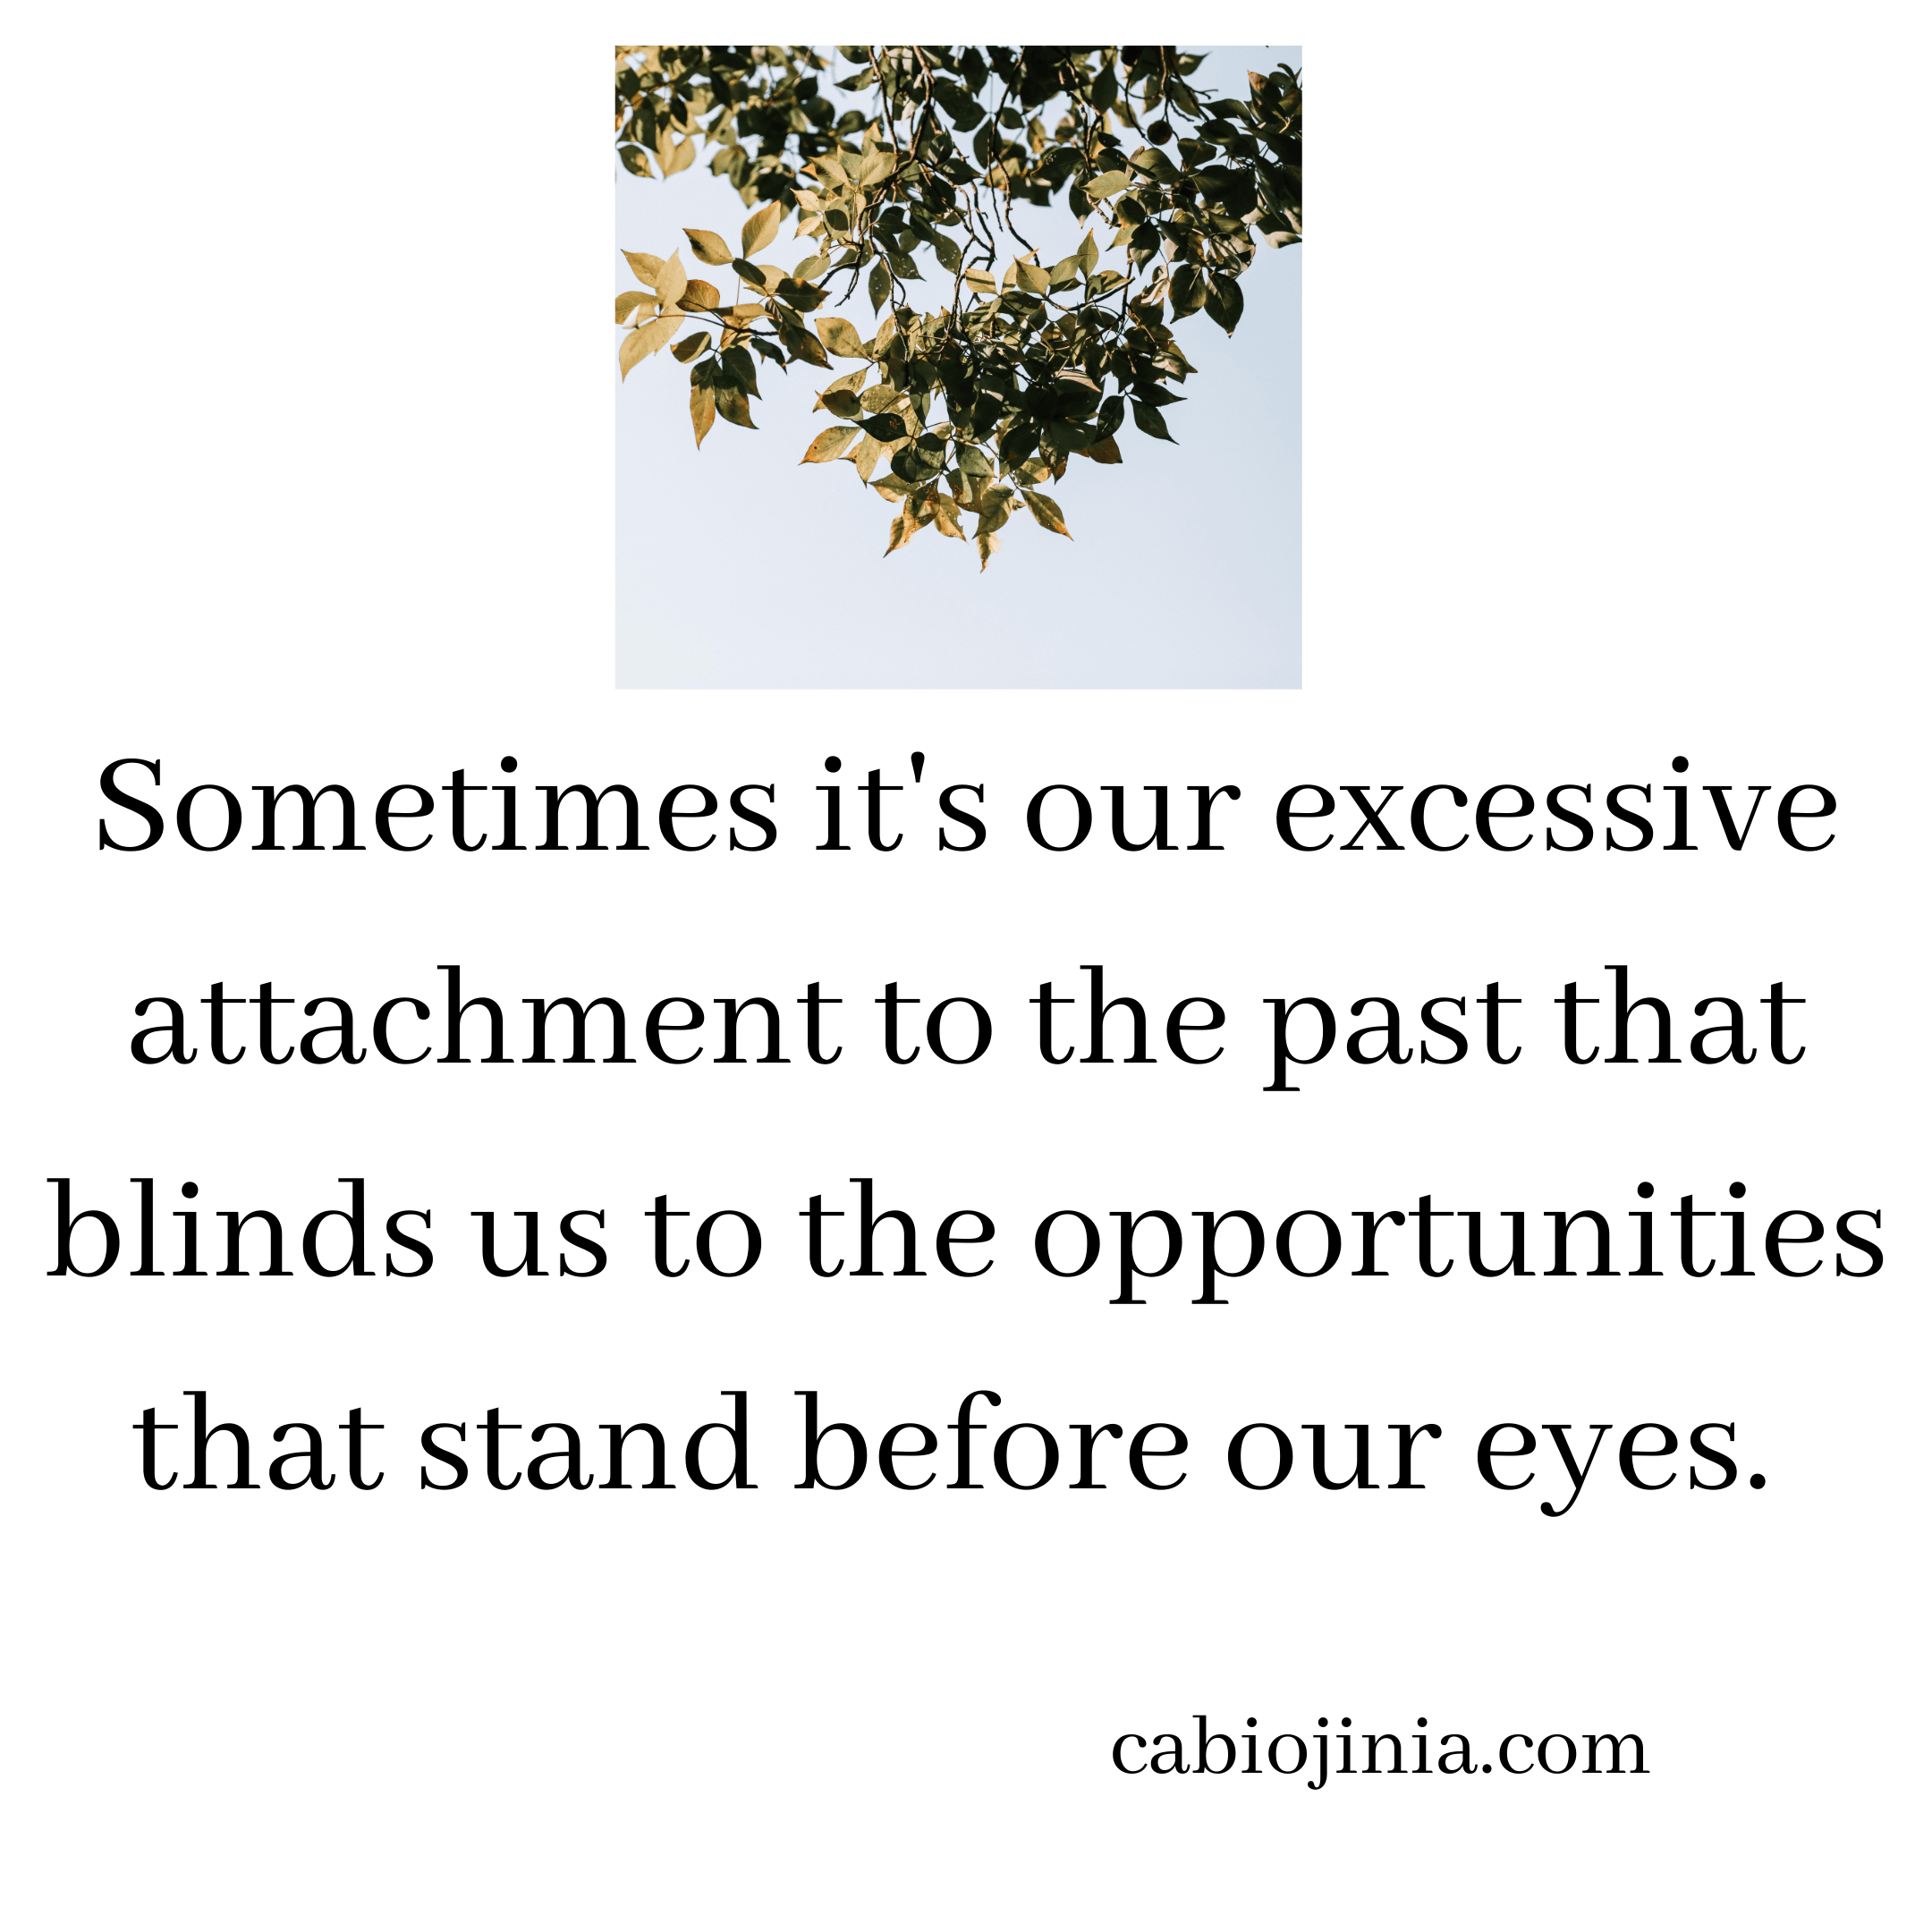 Excessive attachment to the past blinds us. Cabiojinia